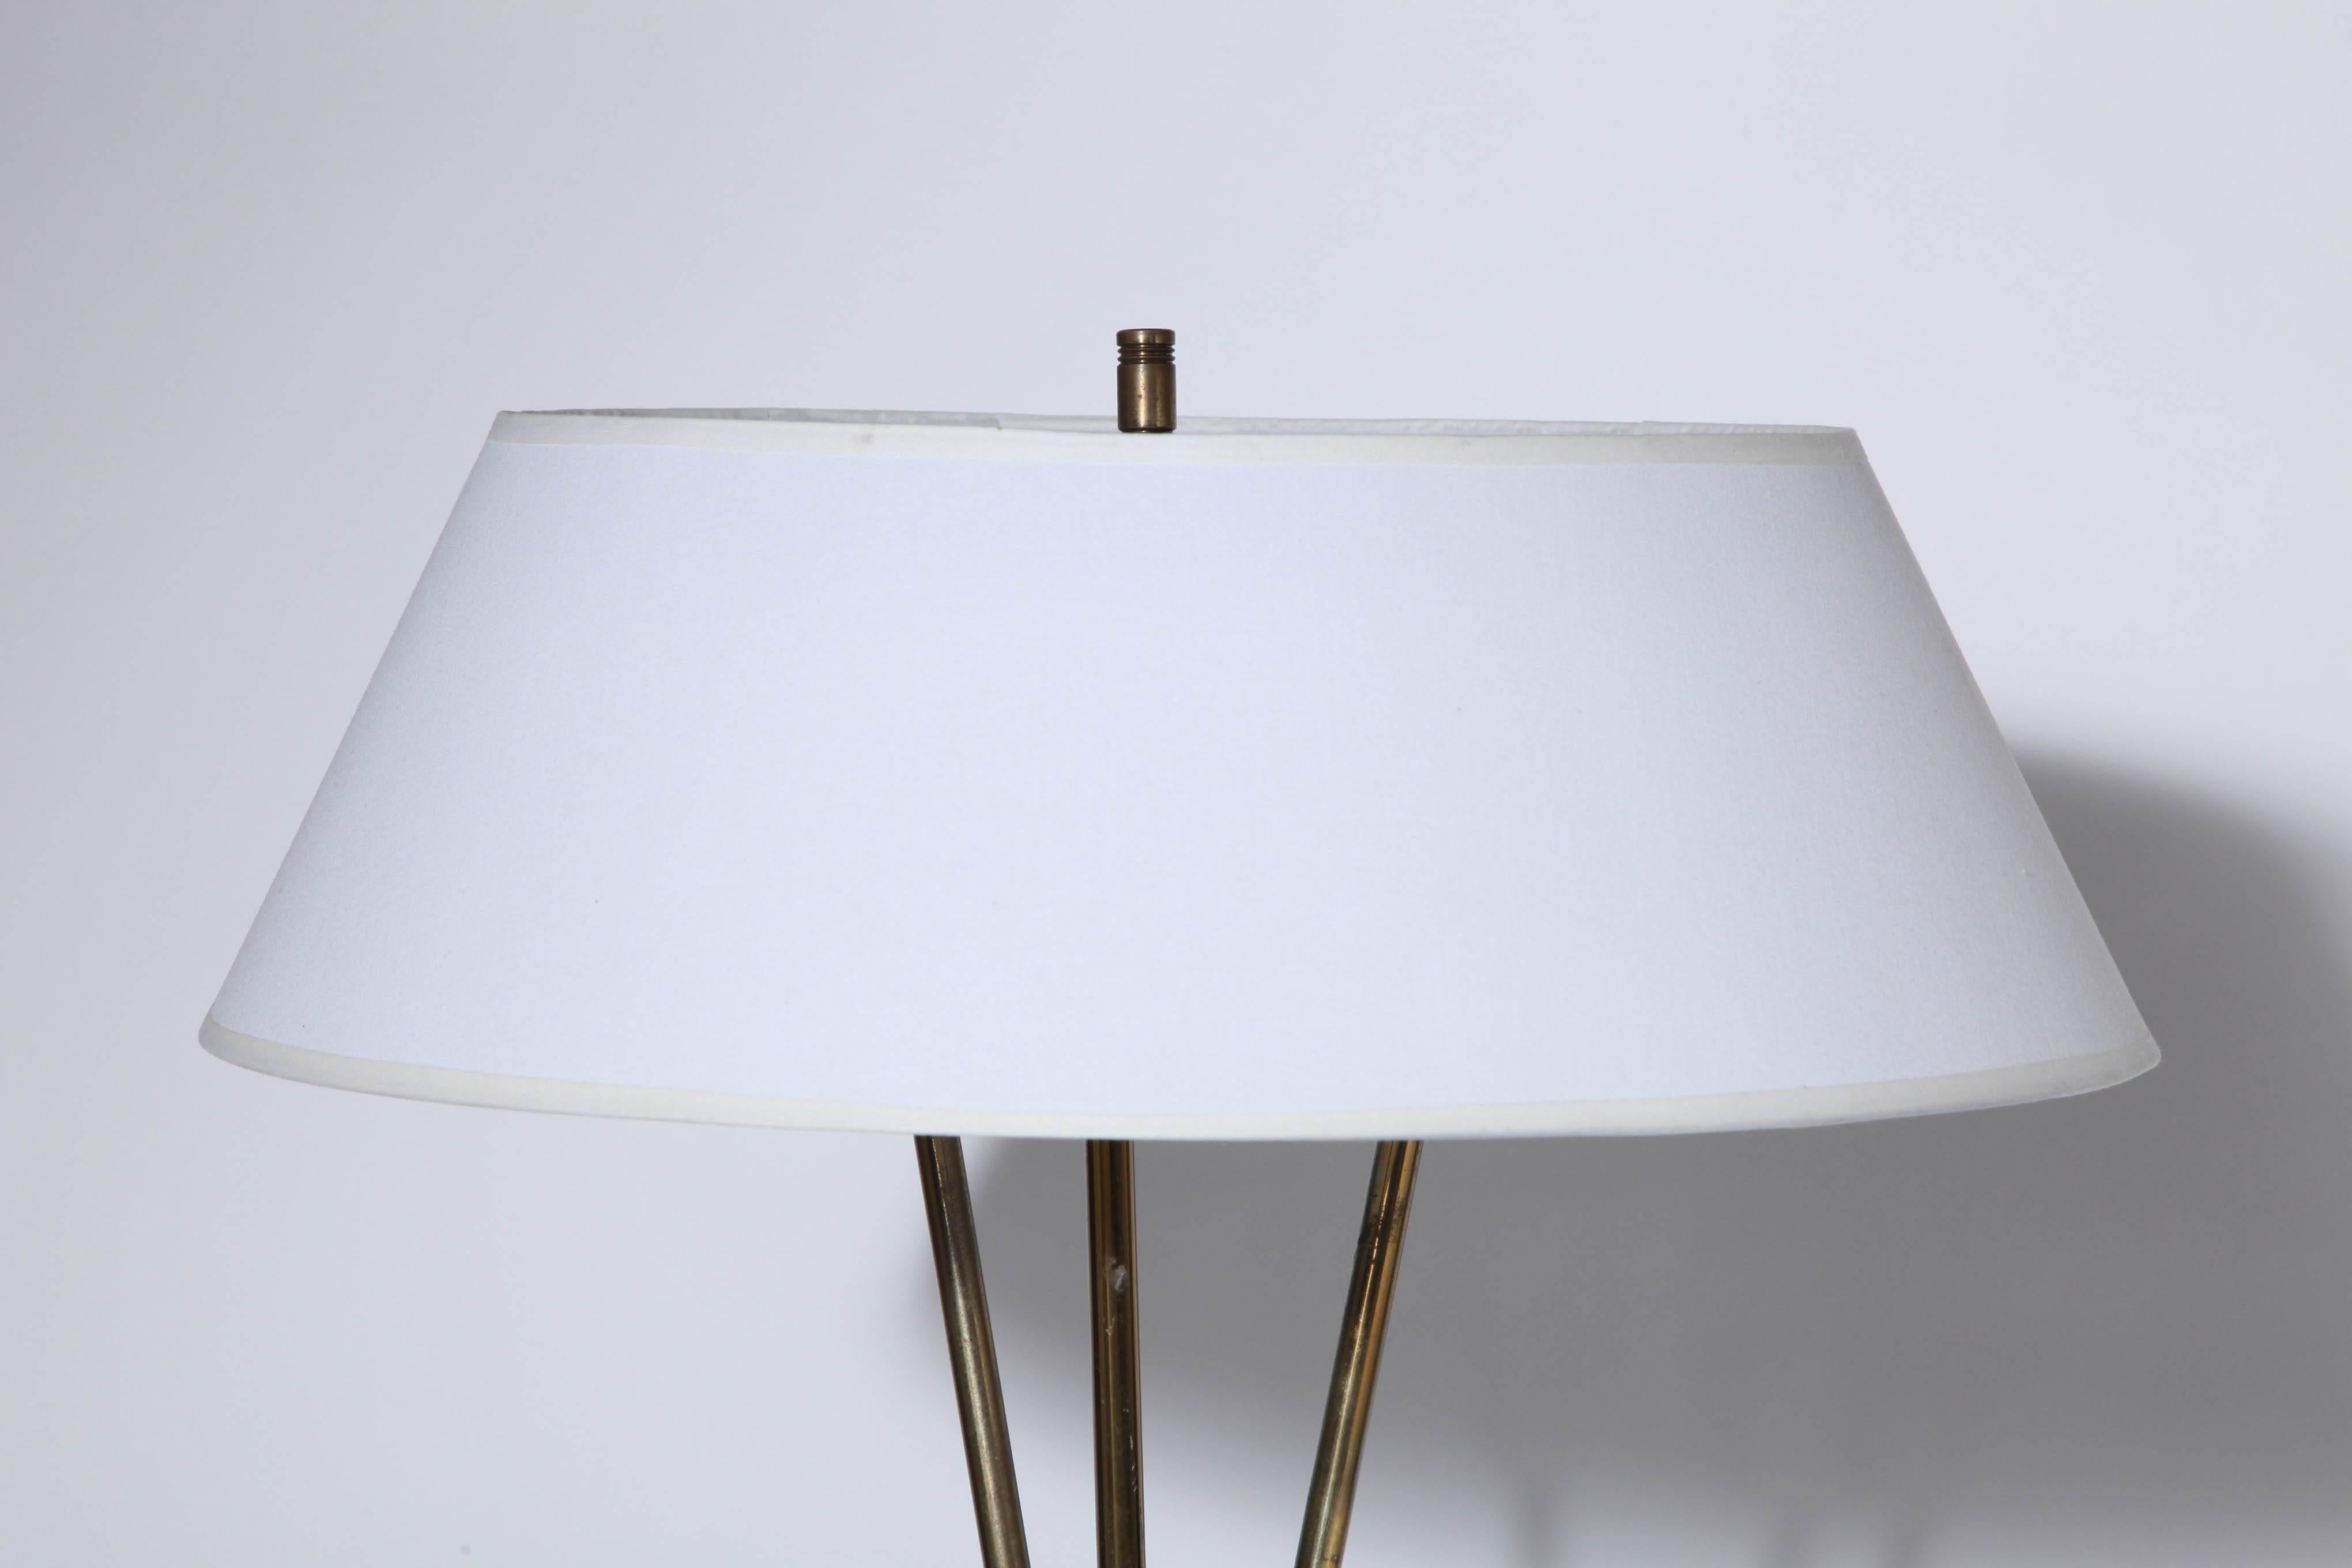 Early Gerald Thurston for Lightolier Brass Tripod Reading Floor Lamp with White Linen Shade. Featuring a joined tripod, three legged patinated Brass framework, Off-White enameled diffuser, new (7H x 20D) White linen shade. Detailed with Brass ball